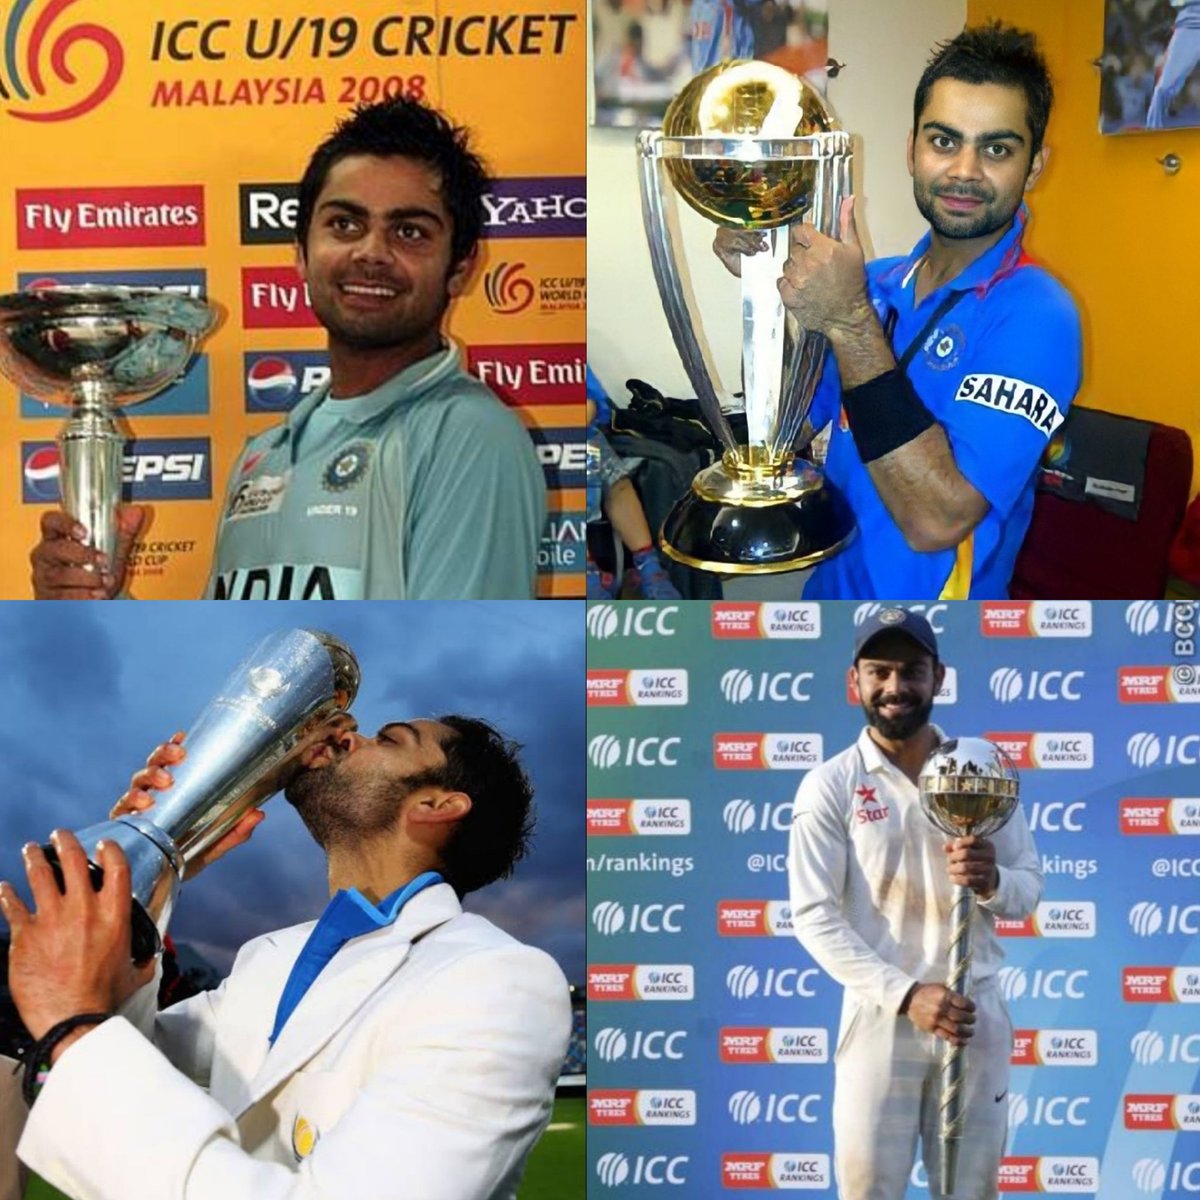 Okay without crying put your CWC trophy as player and ICC trophy test mace as captain on the table. And this doesn't change the fact that Nofit bottled rigged Home WC infront of 100K spectators